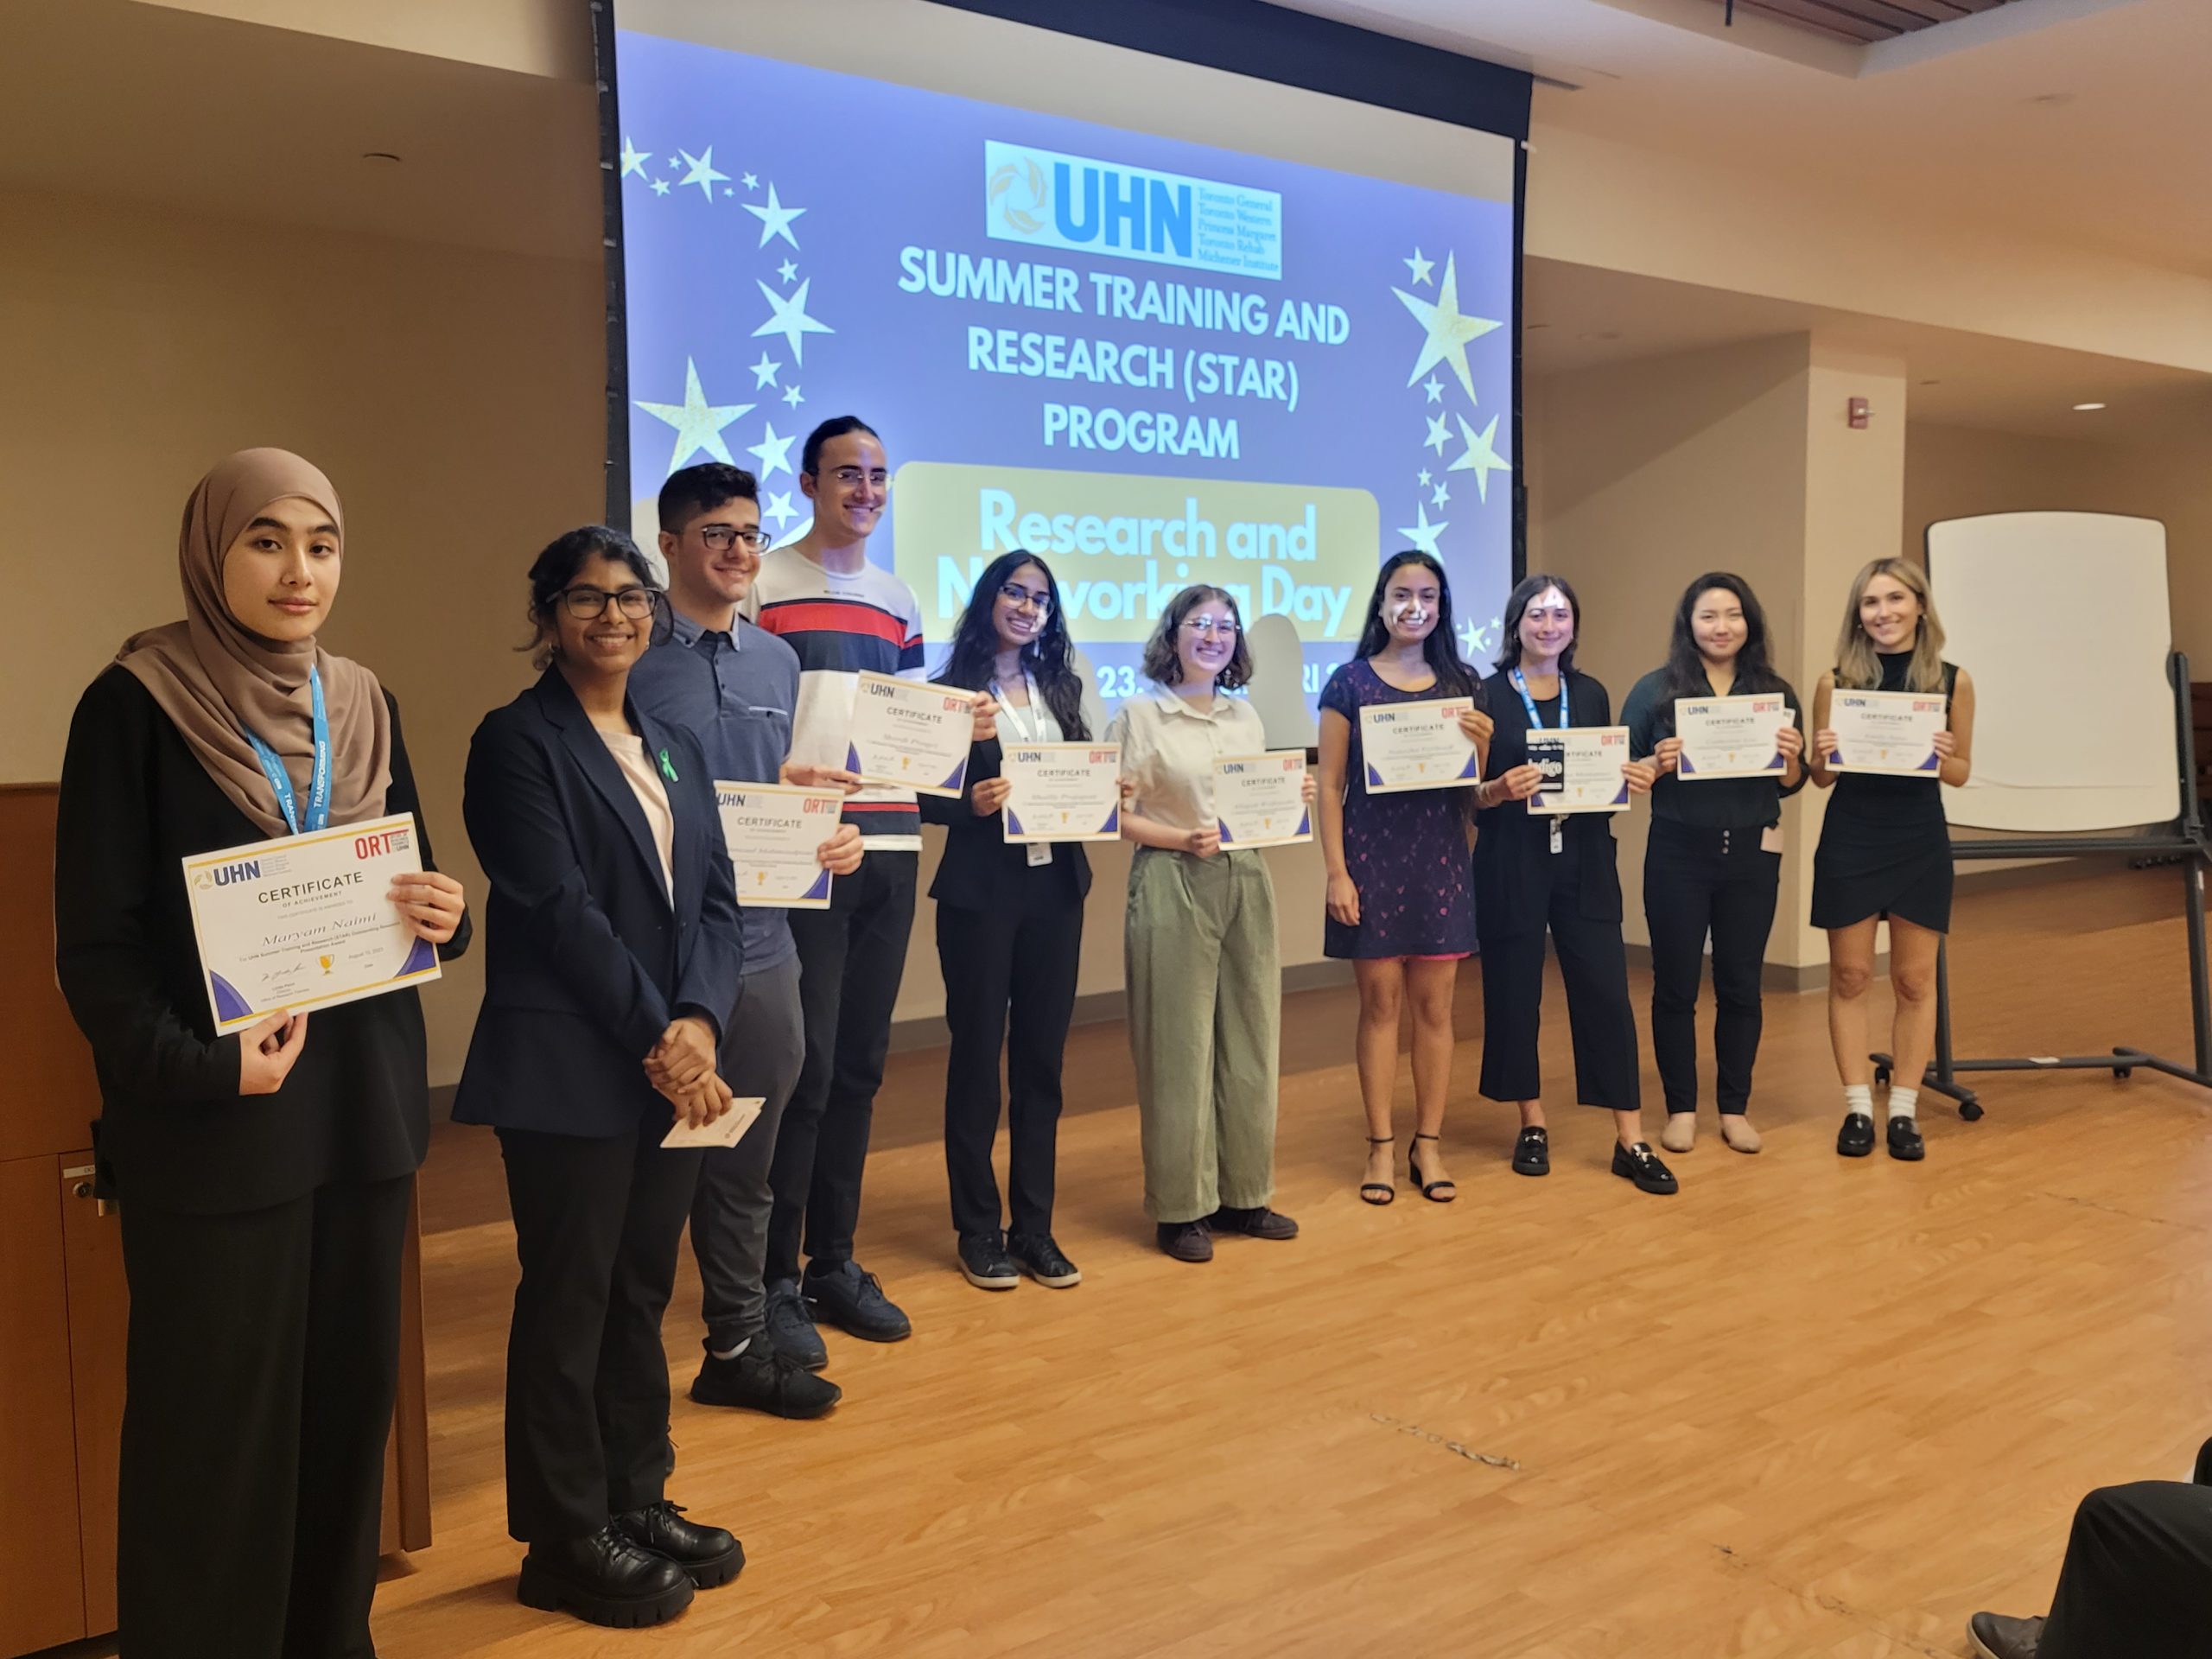 A group of nine individuals is posing for a photo at what appears to be a certificate award ceremony. They are standing in front of a presentation screen that reads "UHN SUMMER TRAINING AND RESEARCH (STAR) PROGRAM Research." Each person is holding a certificate with the UHN logo, signifying some achievement or completion within the program.